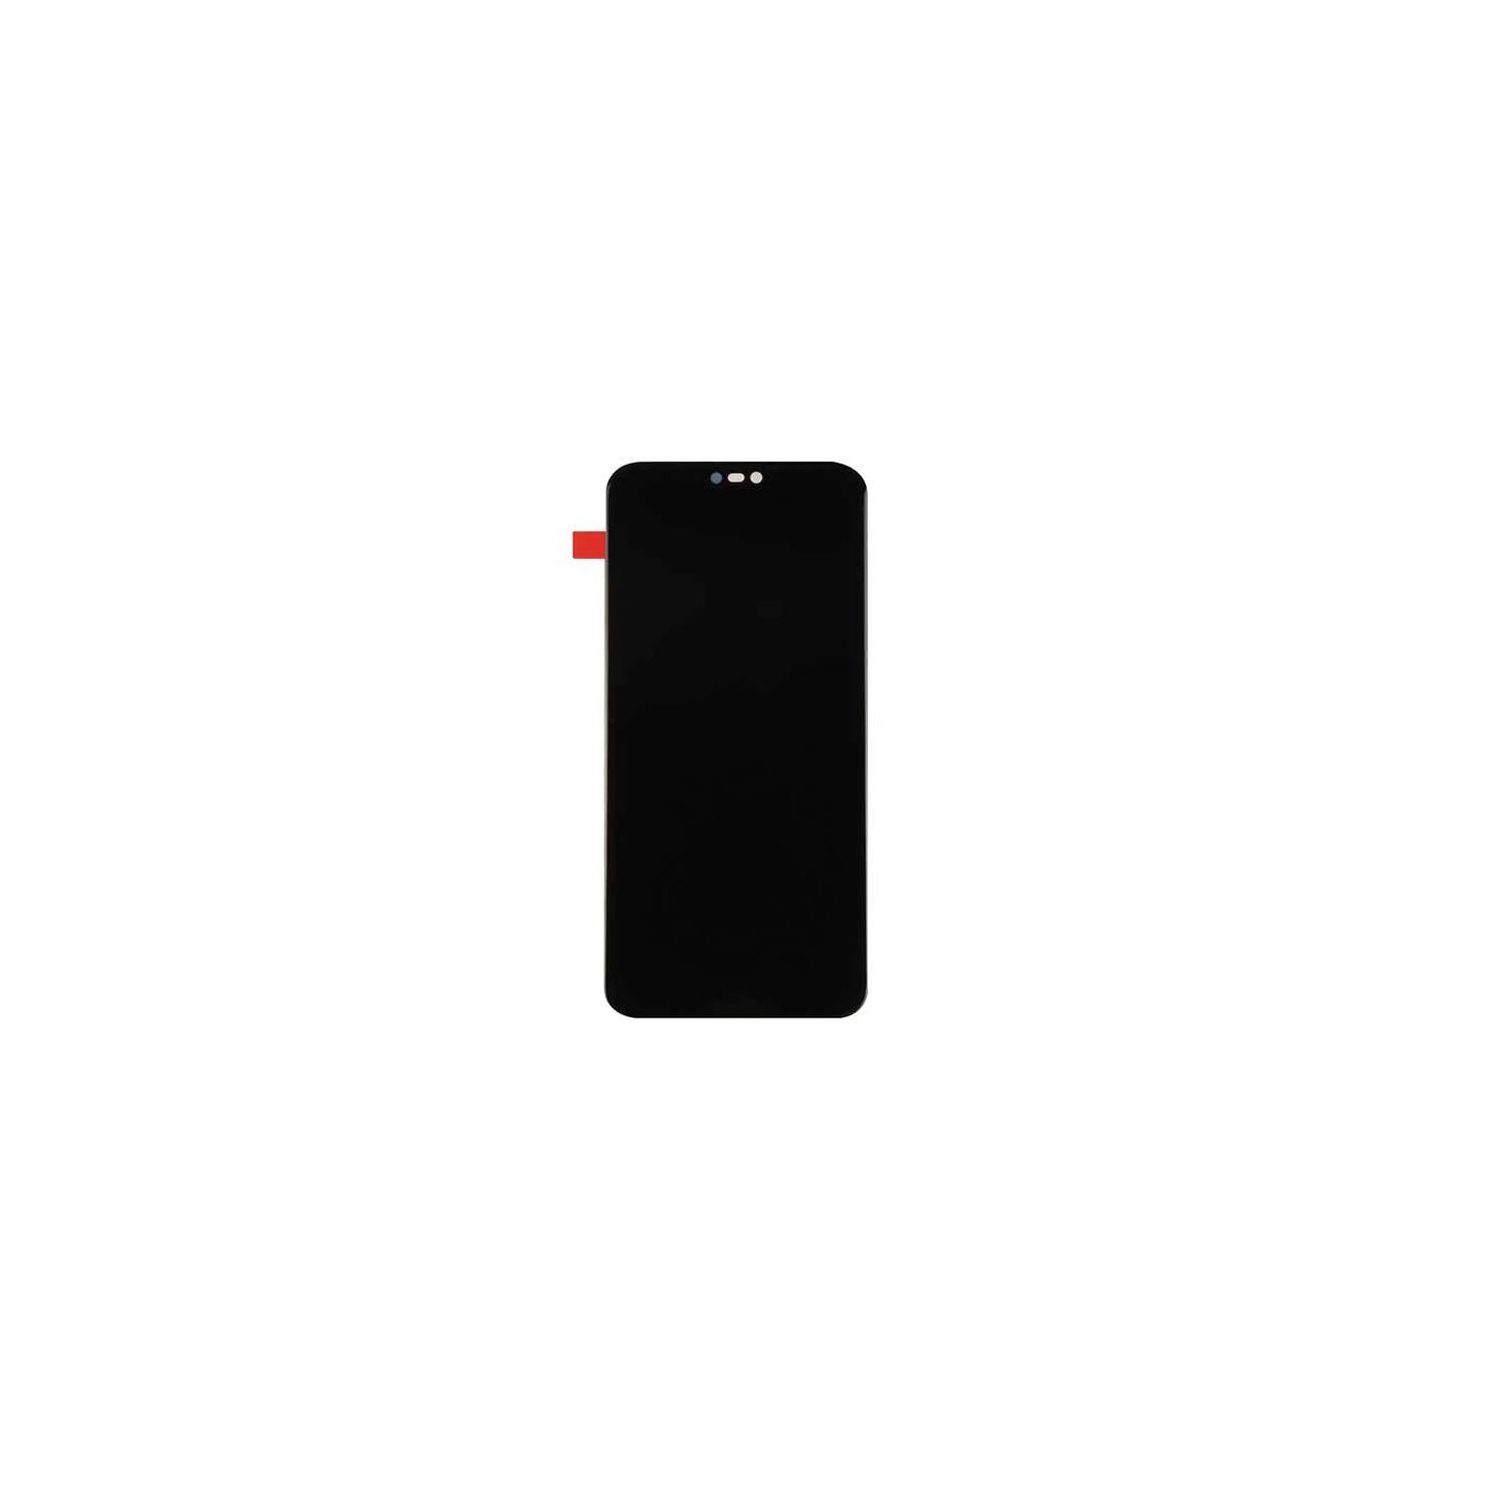 Huawei P20 Lite LCD Display Touch Screen Digitizer Assembly Replacement - Black